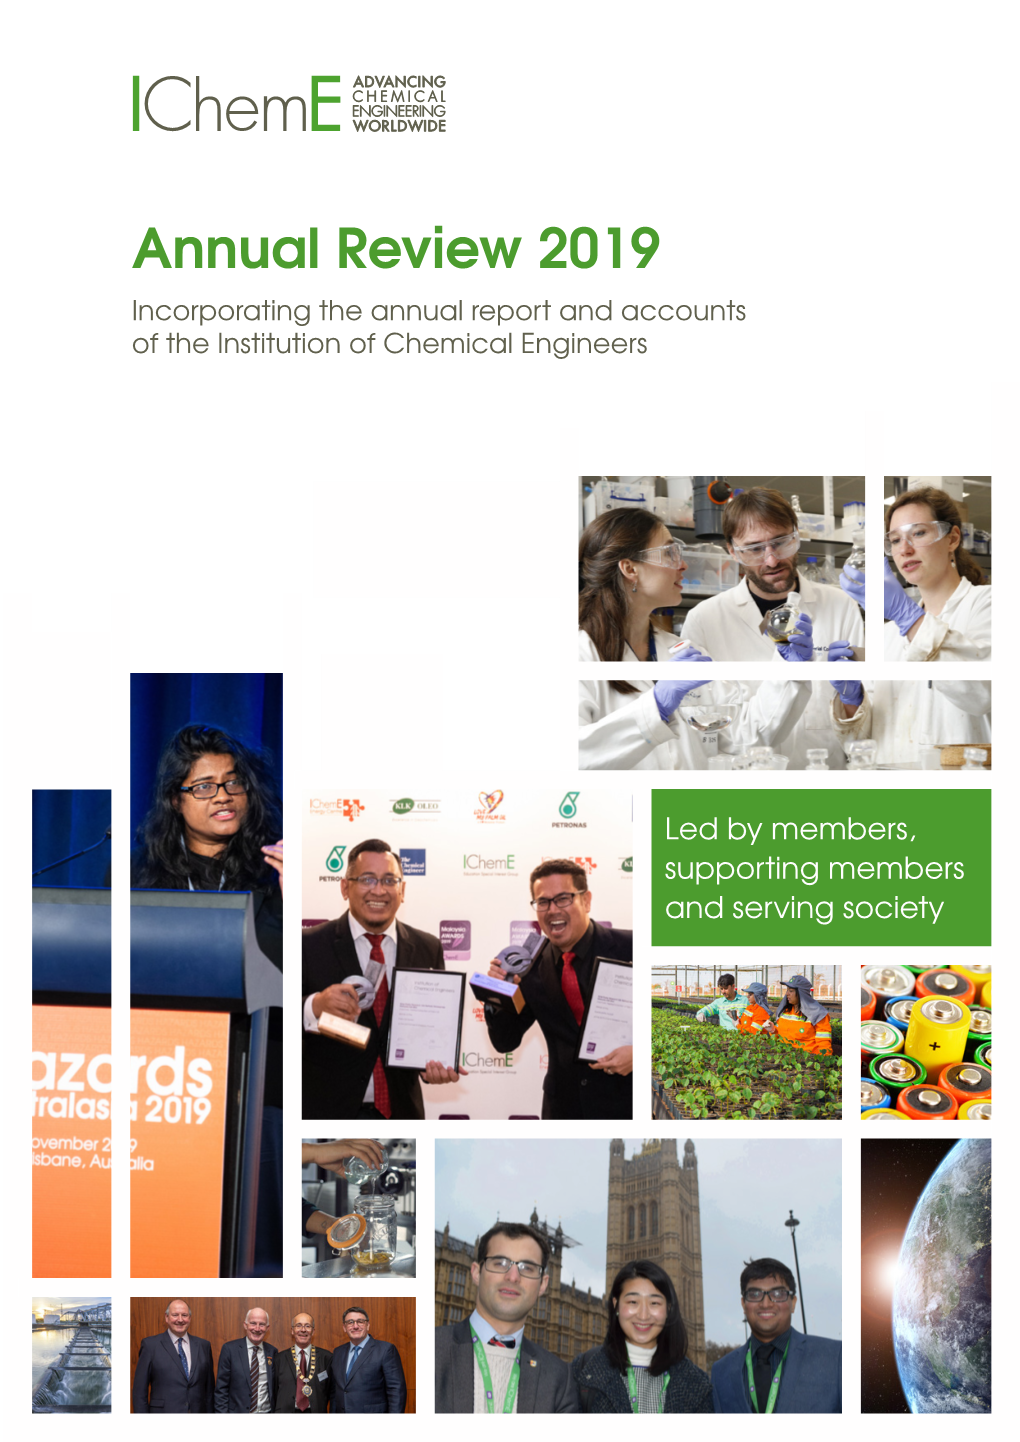 Annual Review 2019 Incorporating the Annual Report and Accounts of the Institution of Chemical Engineers